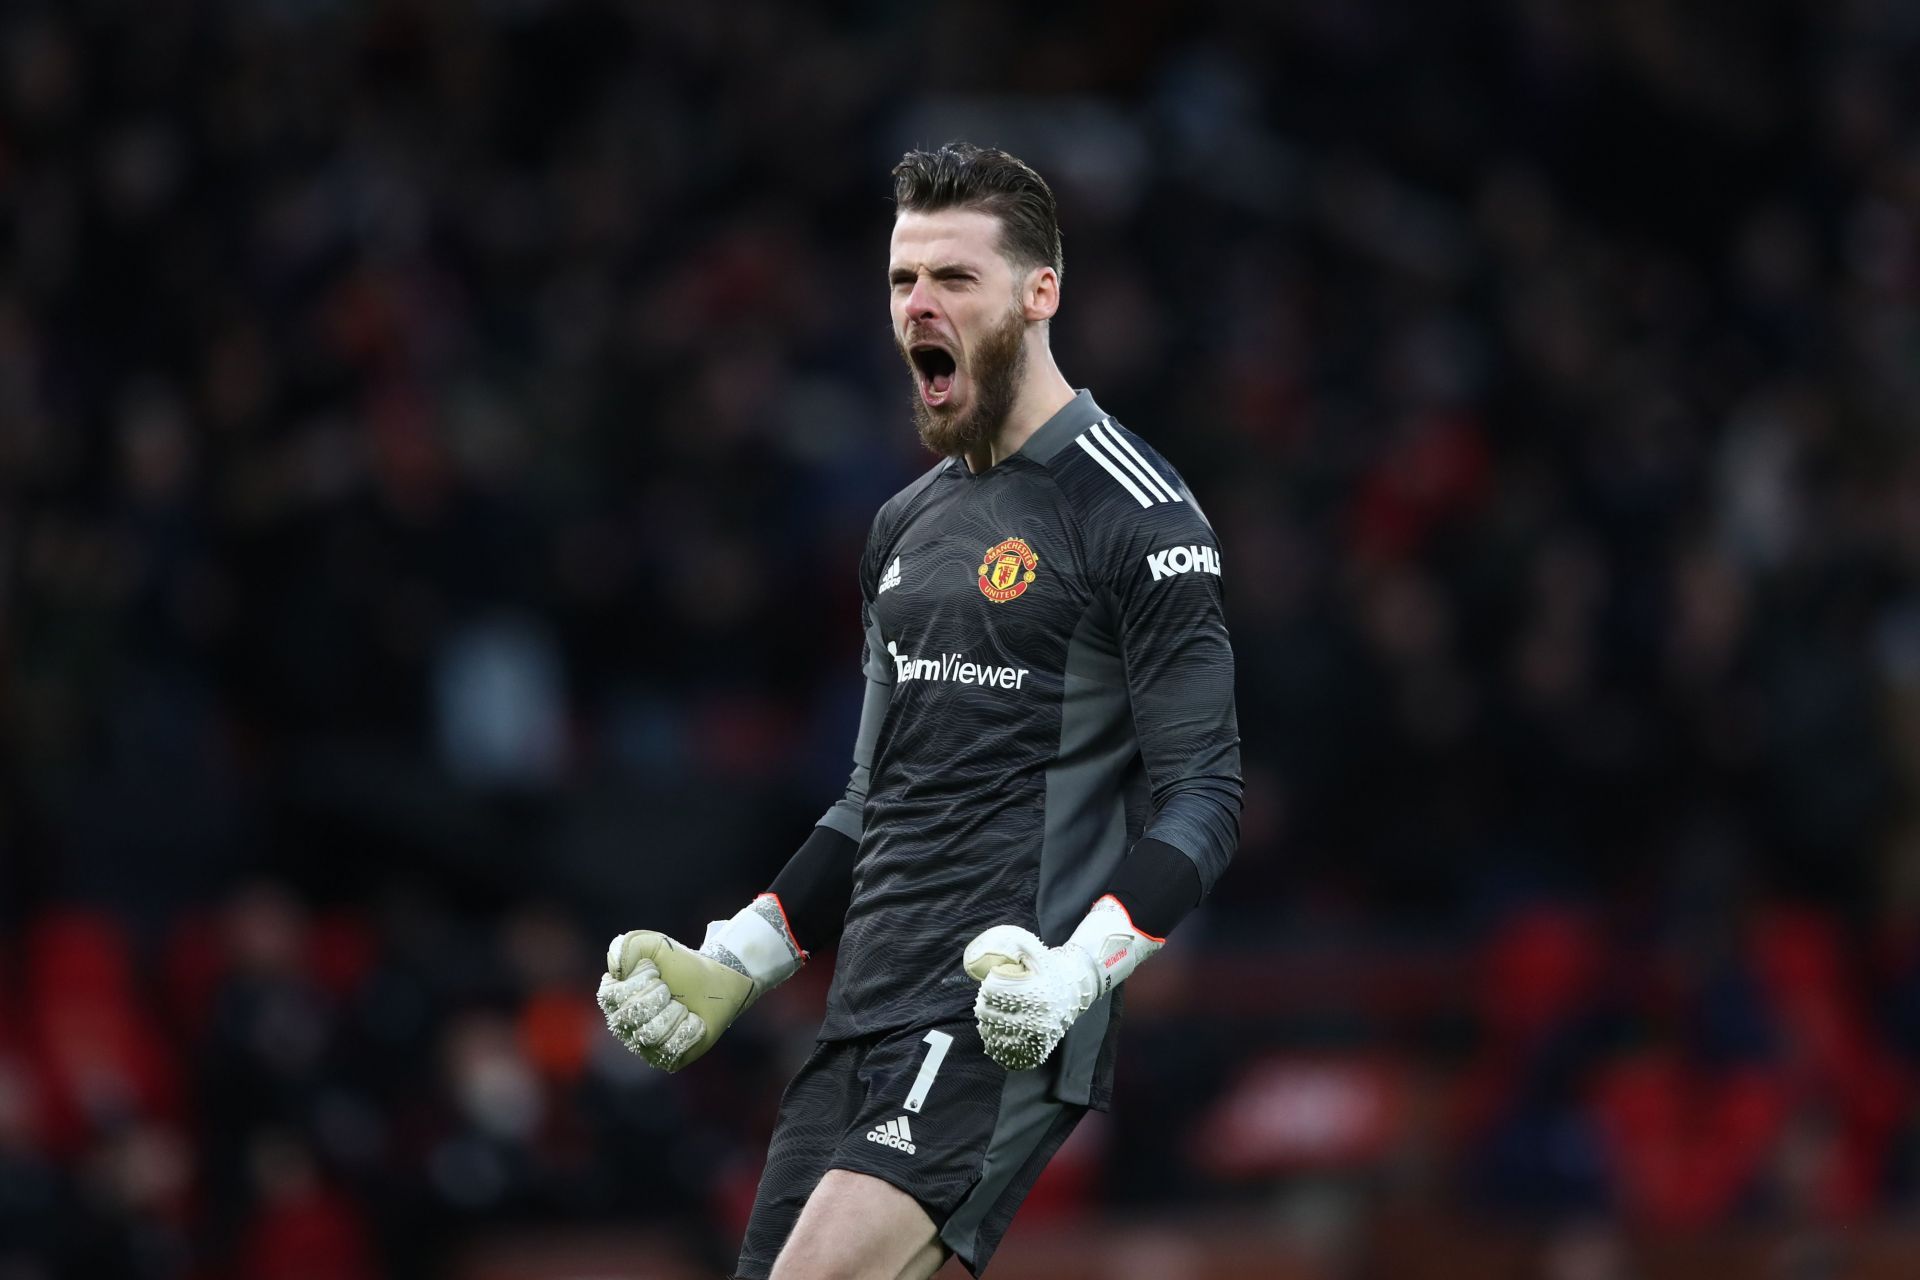 Manchester United goalkeeper David de Gea has been in fine form in the past month